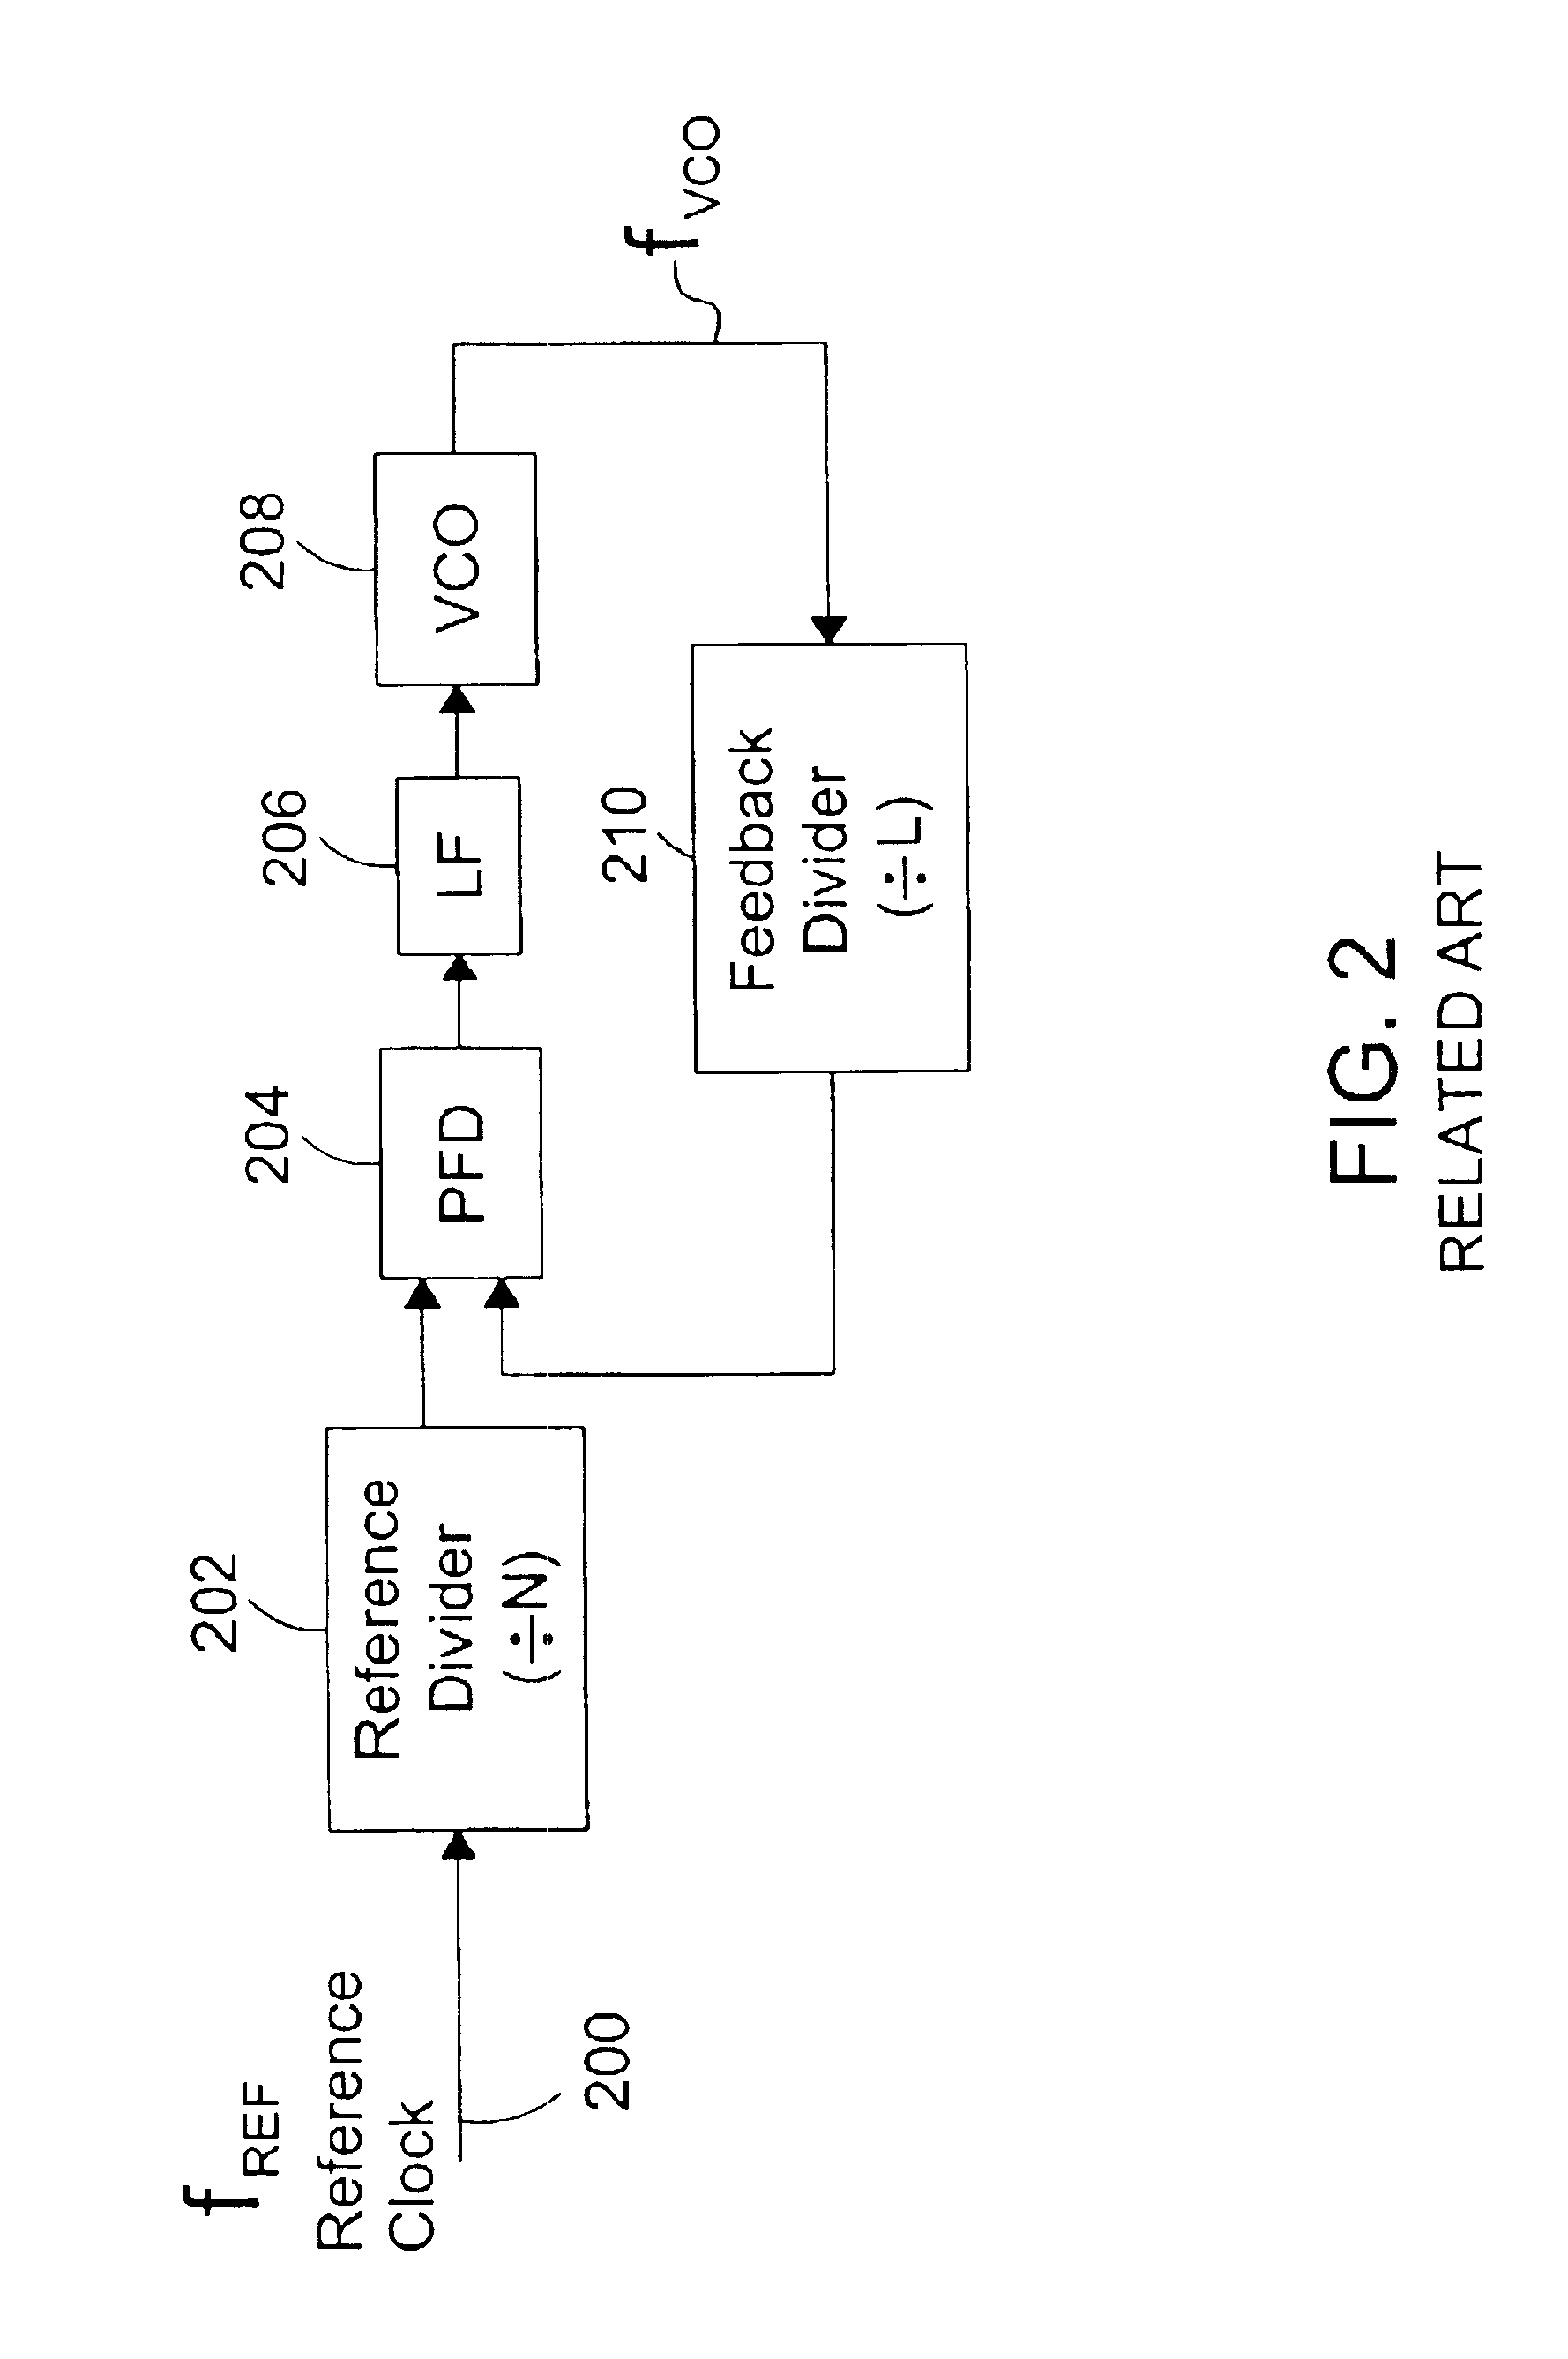 LC oscillator with wide tuning range and low phase noise